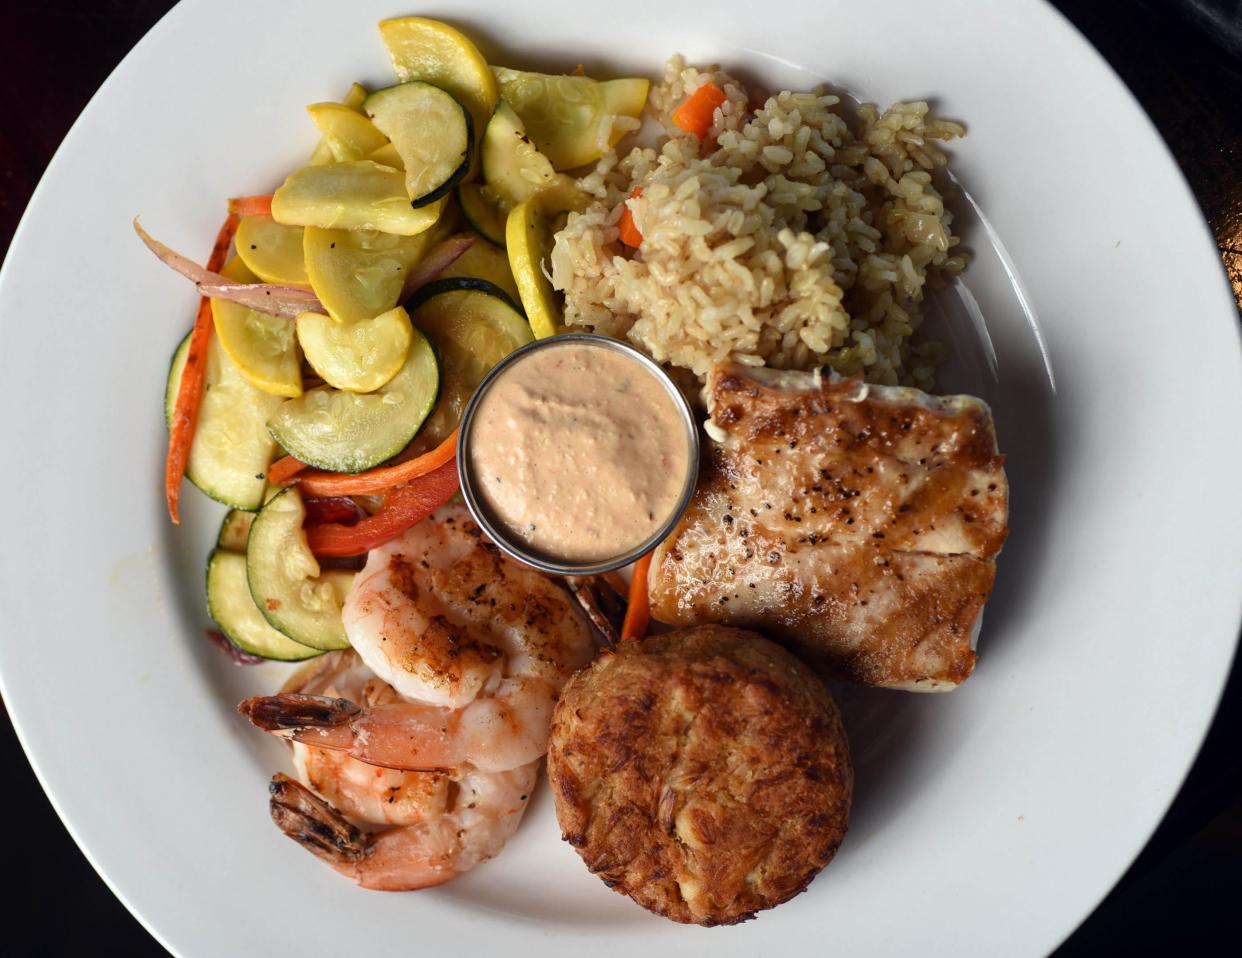 The chef's trio at the Bridge Tender Restaurant features grilled shrimp, grilled mahi and crab cake in Wilmington, N.C. The well-known restaurant opened in 1976 and overlooks the Intracoastal Waterway. MATT BORN/STARNEWS